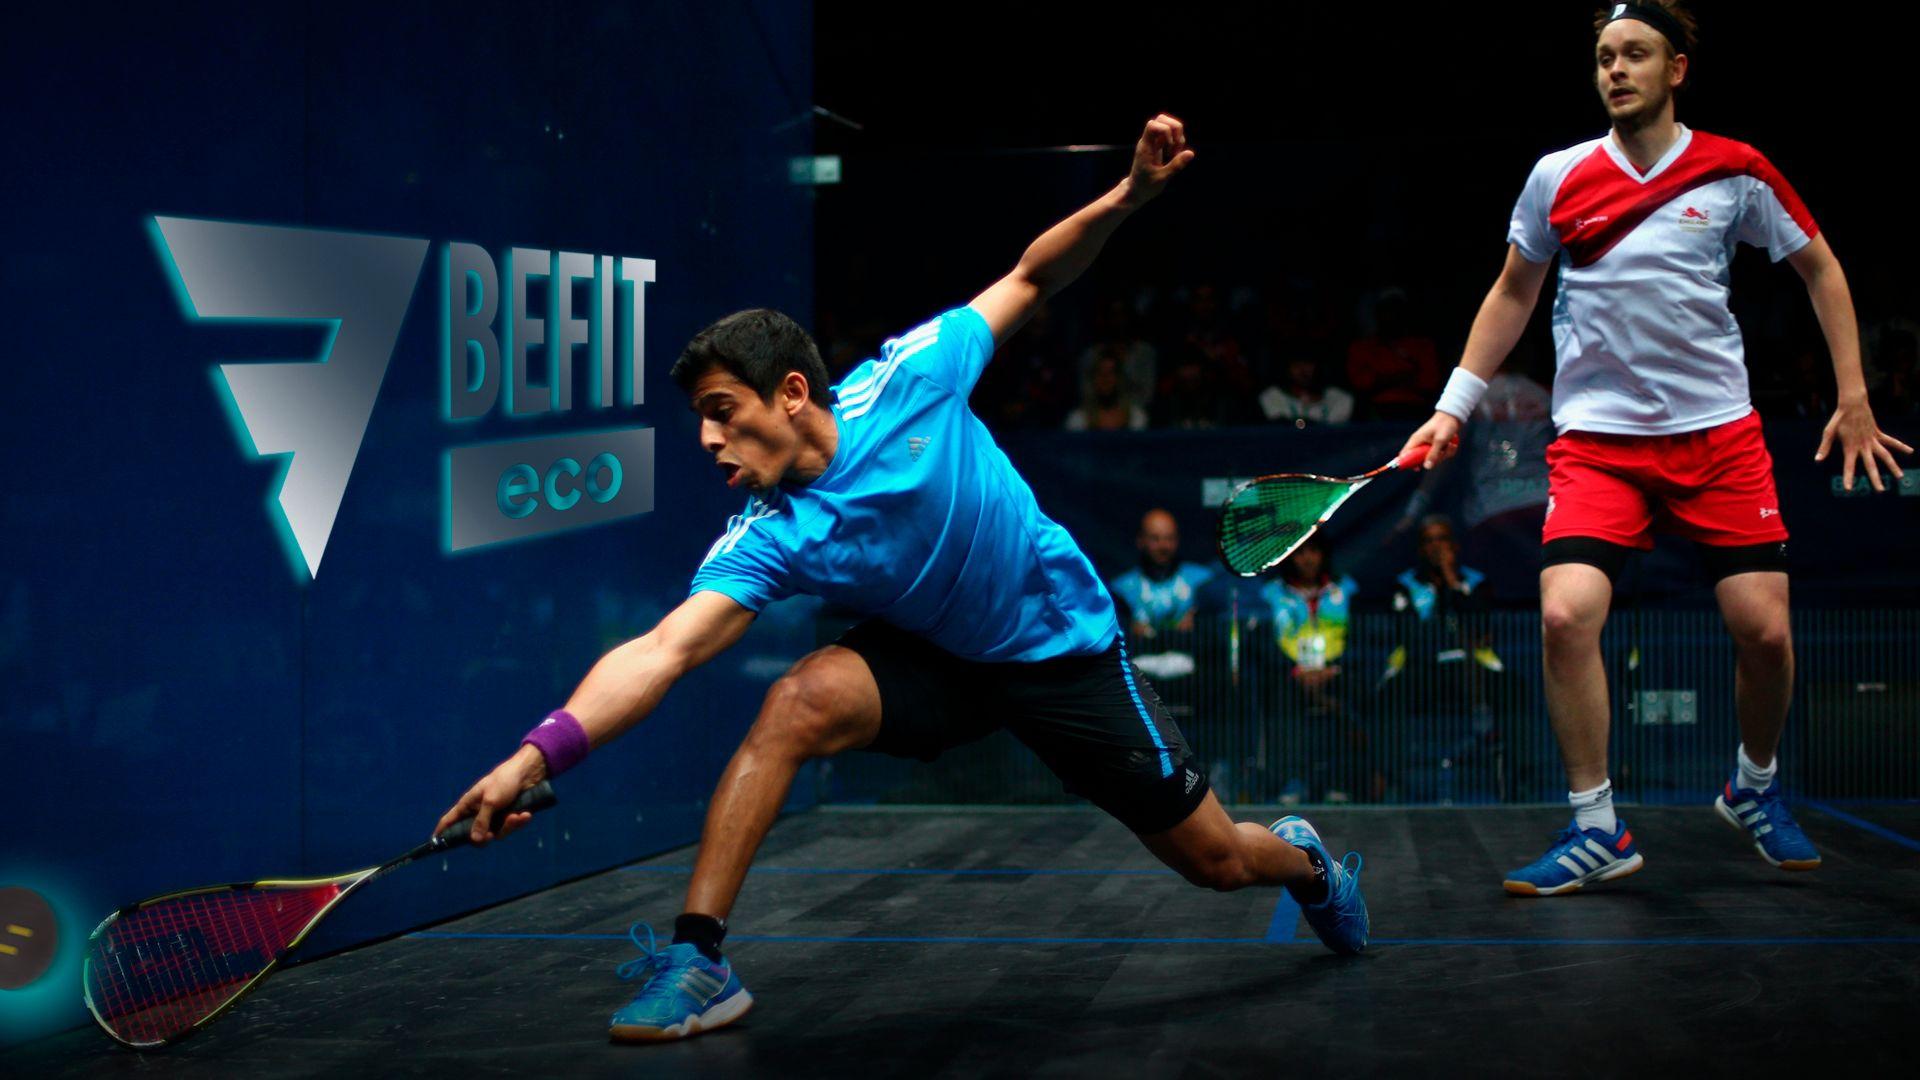 From beginners to professional coaches: how was the international squash tournament in Tashkent?